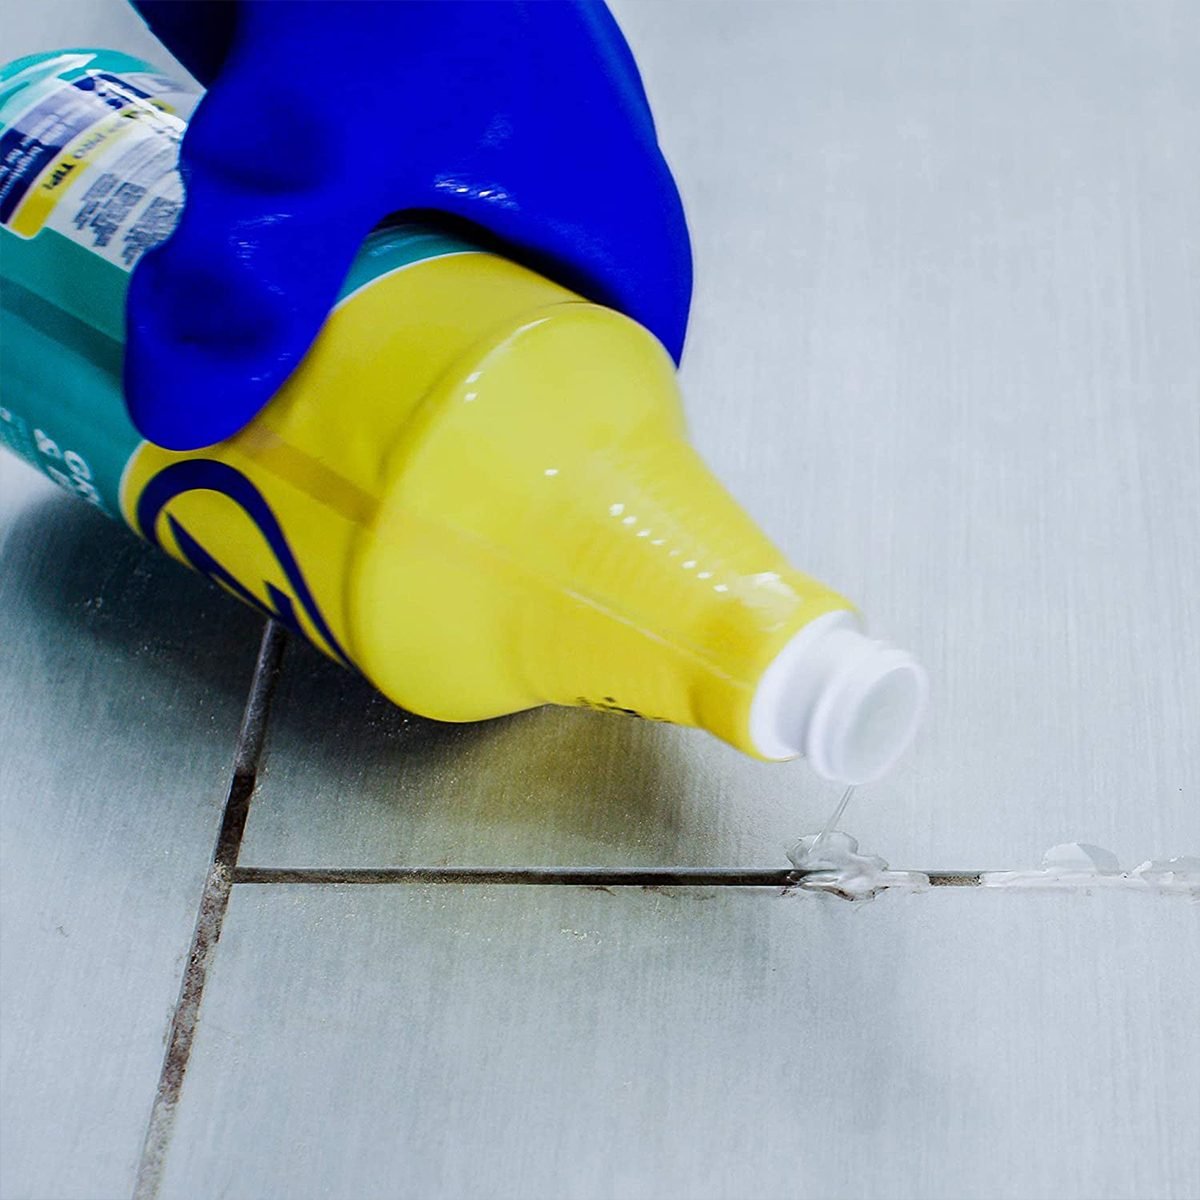 This $7 Grout Cleaner Is All Over TikTok—Here's Why